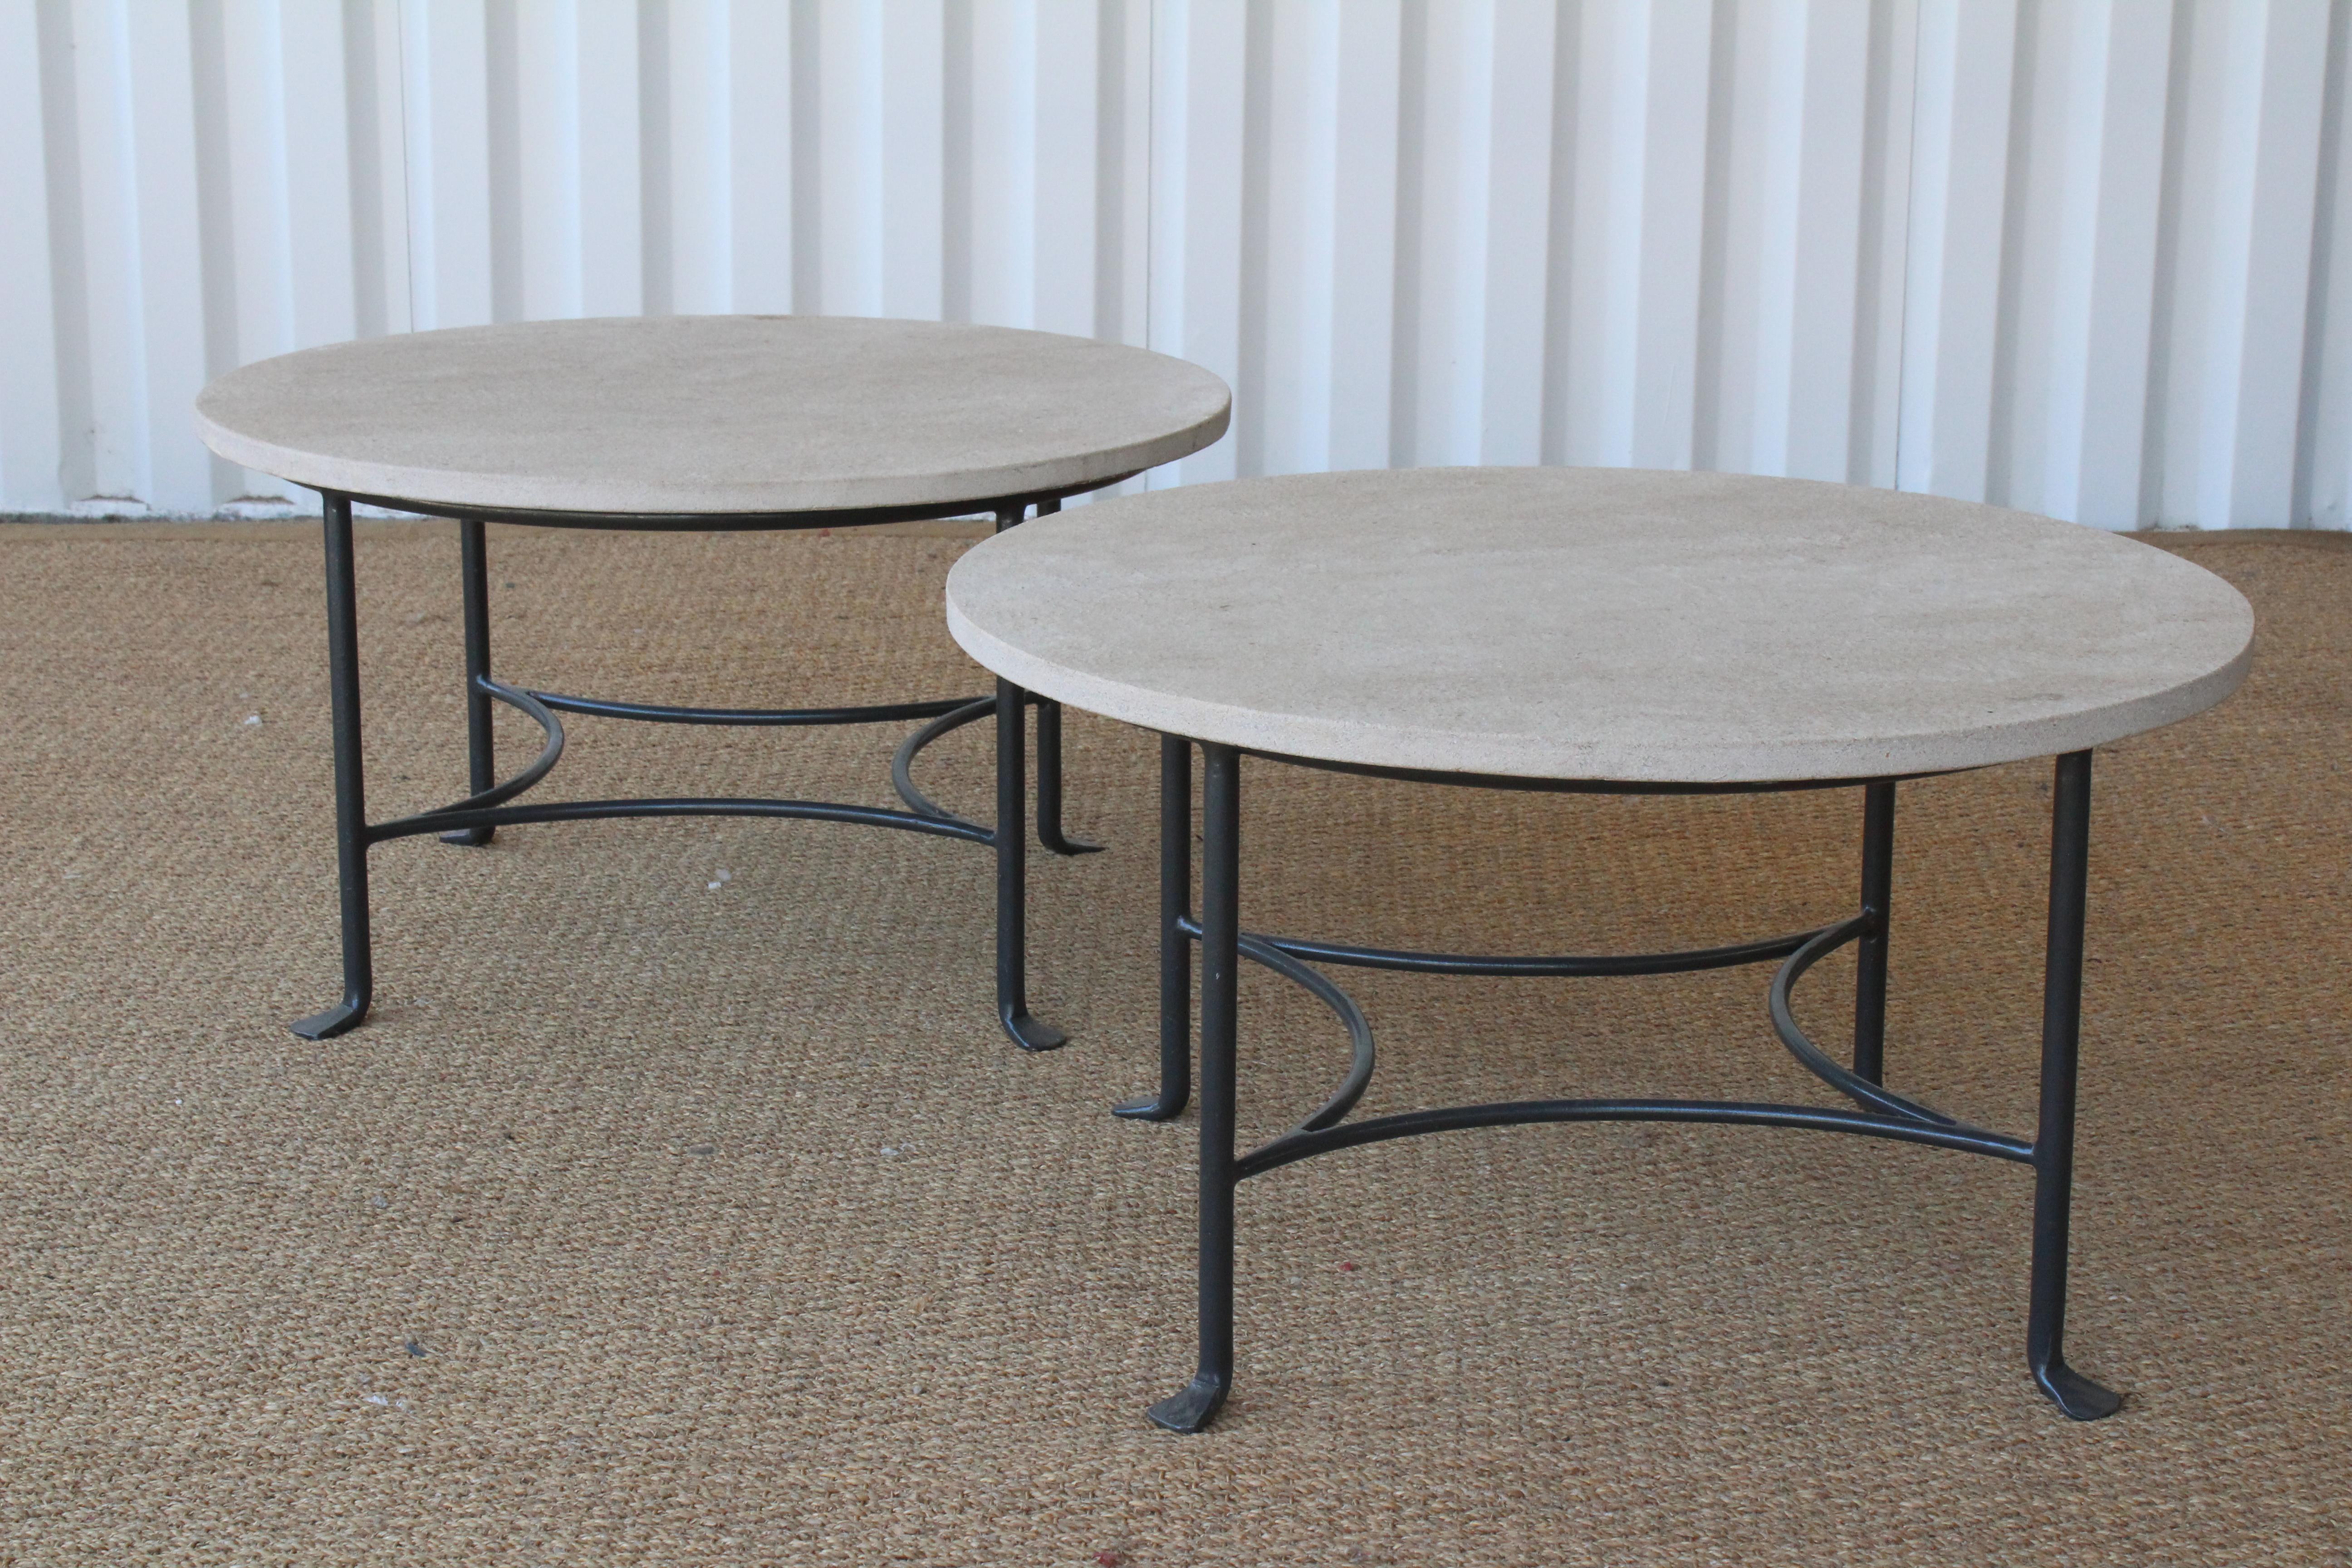 Iron base table with limestone top. Pair available, sold individually. Suitable for indoor or outdoor use. New production.